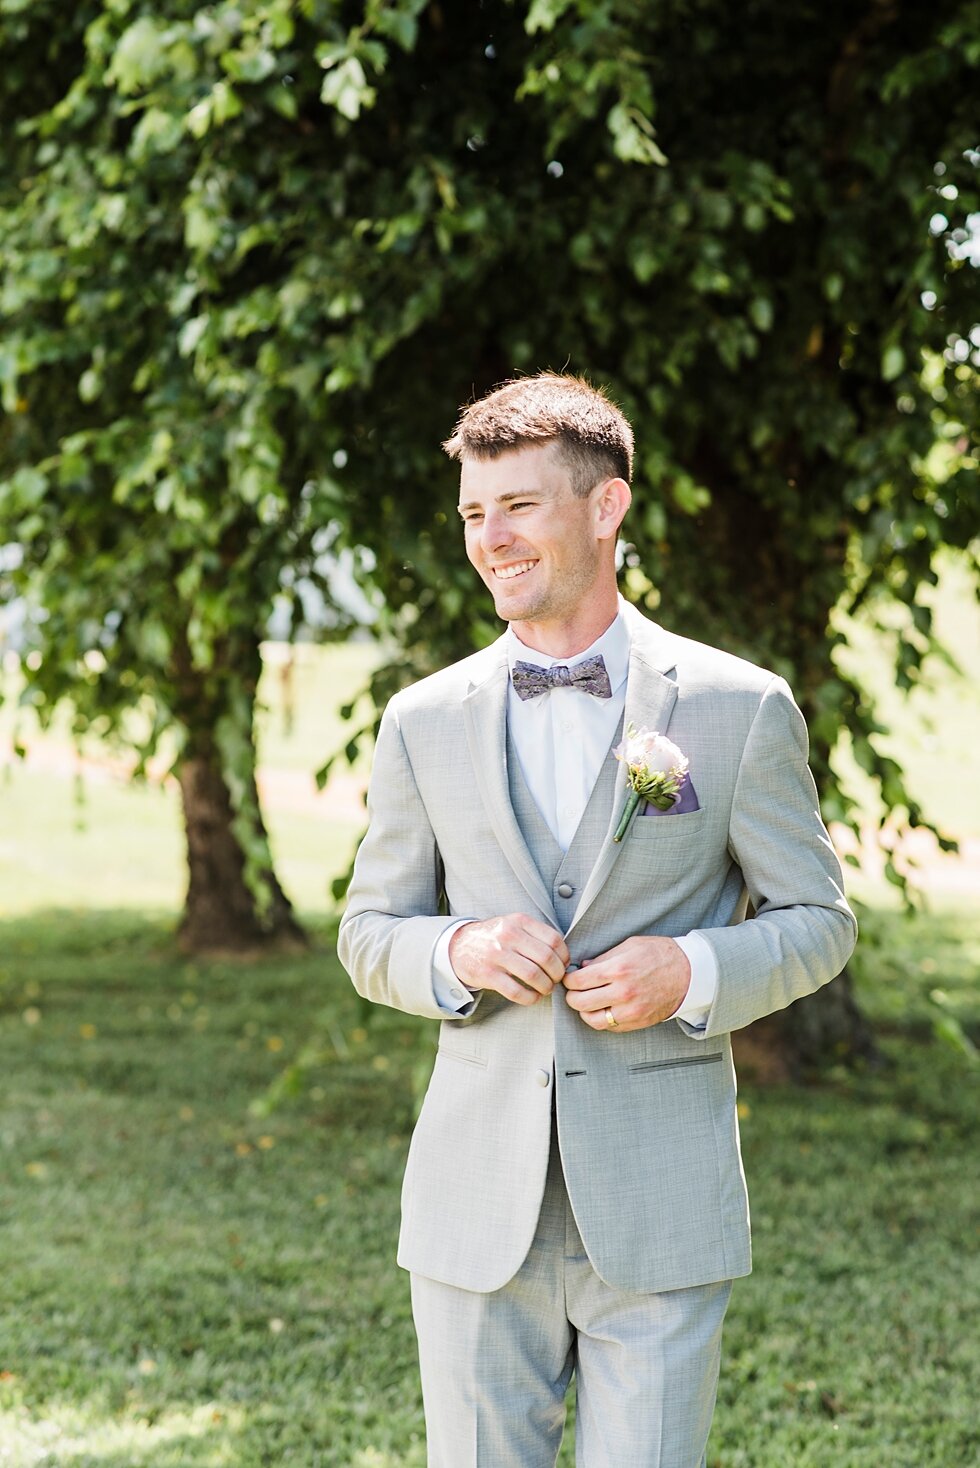  Smiling groom buttoning his jacket and waiting for his gorgeous bride. wedding ceremony details stunning photography married midwest louisville kentucky #weddingphoto #love #justmarried #midwestphotographer #kywedding #louisville #kentuckywedding #a